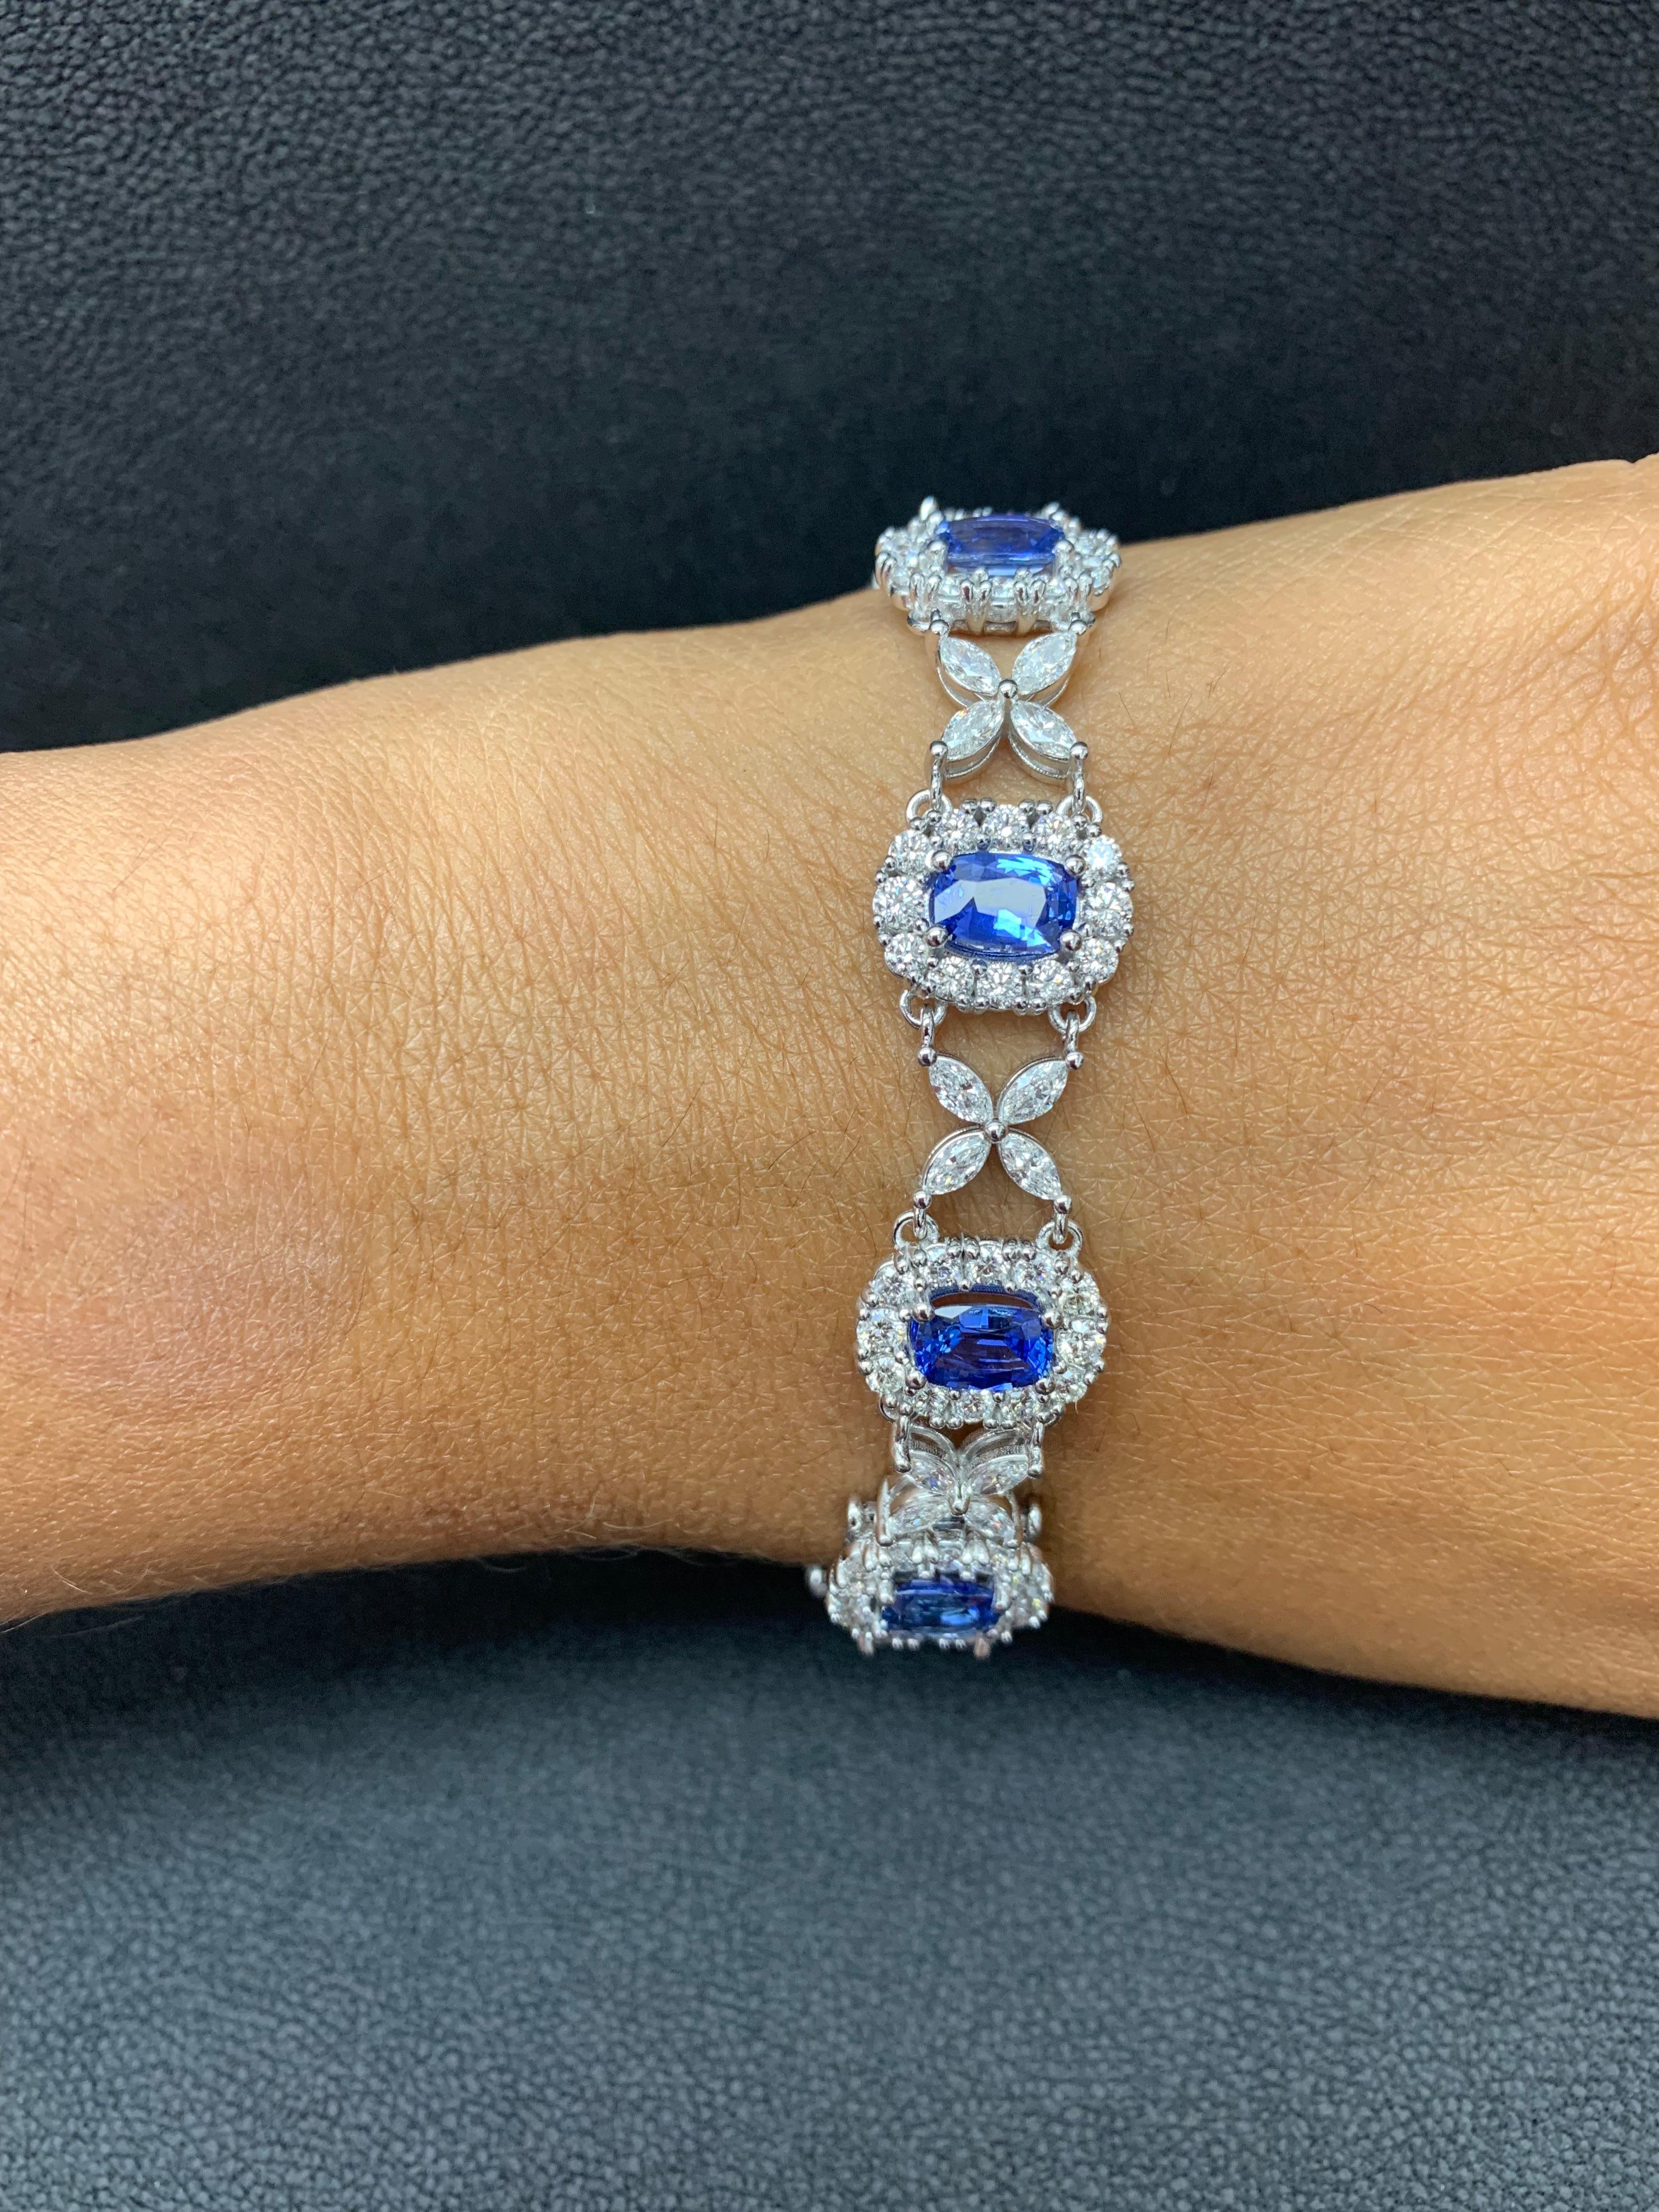 11.47 Carat Oval Cut Blue Sapphire and Diamond Tennis Bracelet in 14K White Gold For Sale 3